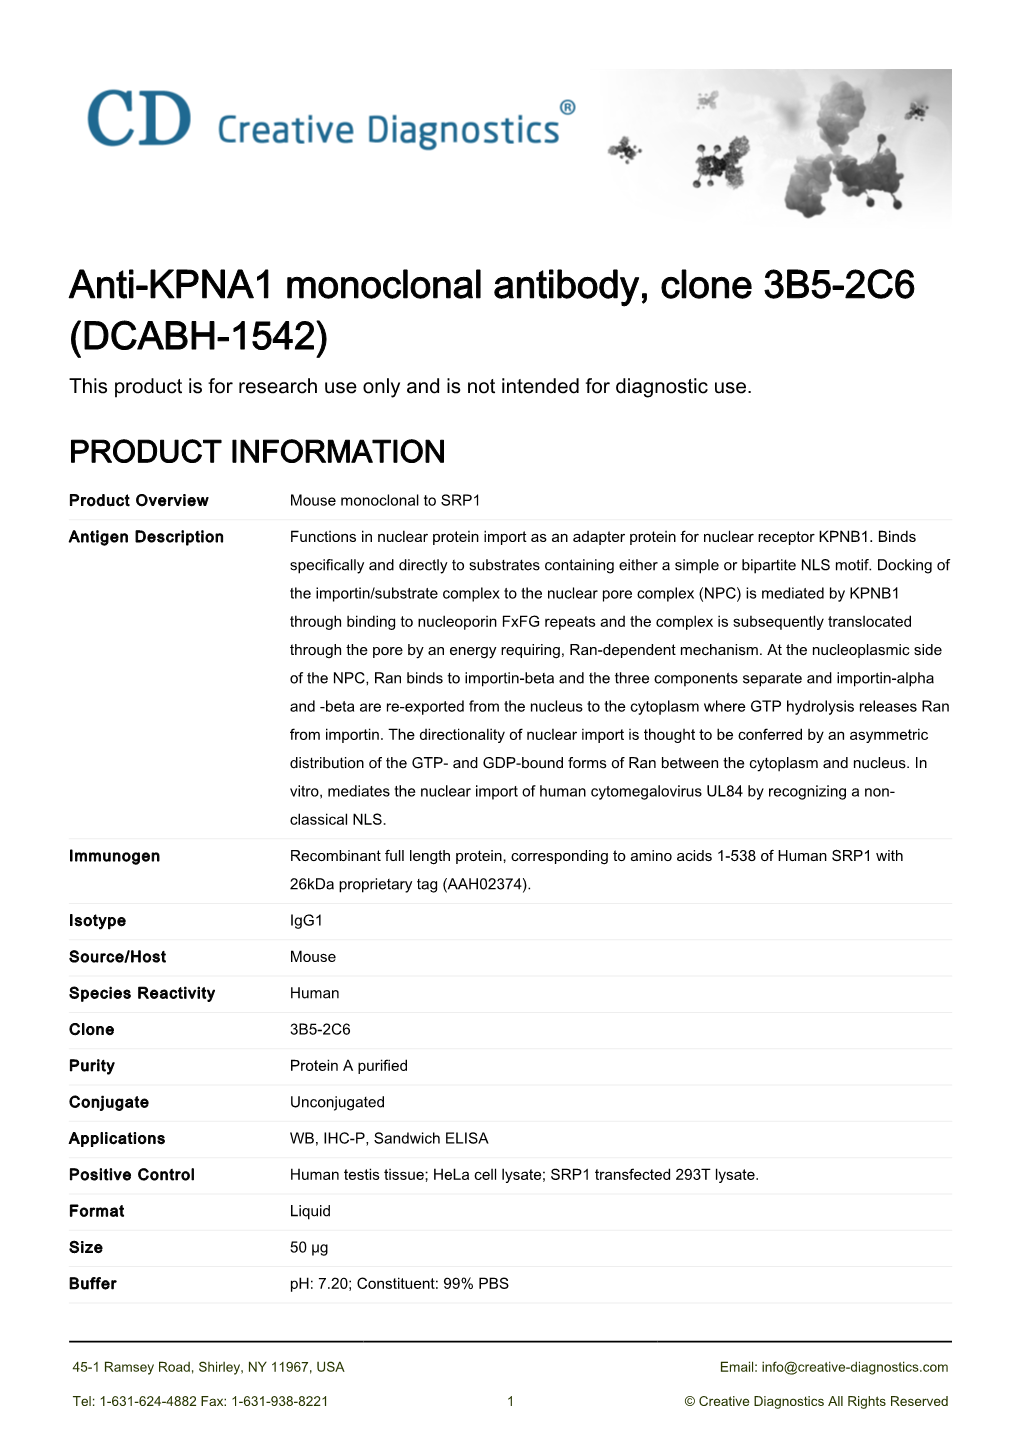 Anti-KPNA1 Monoclonal Antibody, Clone 3B5-2C6 (DCABH-1542) This Product Is for Research Use Only and Is Not Intended for Diagnostic Use